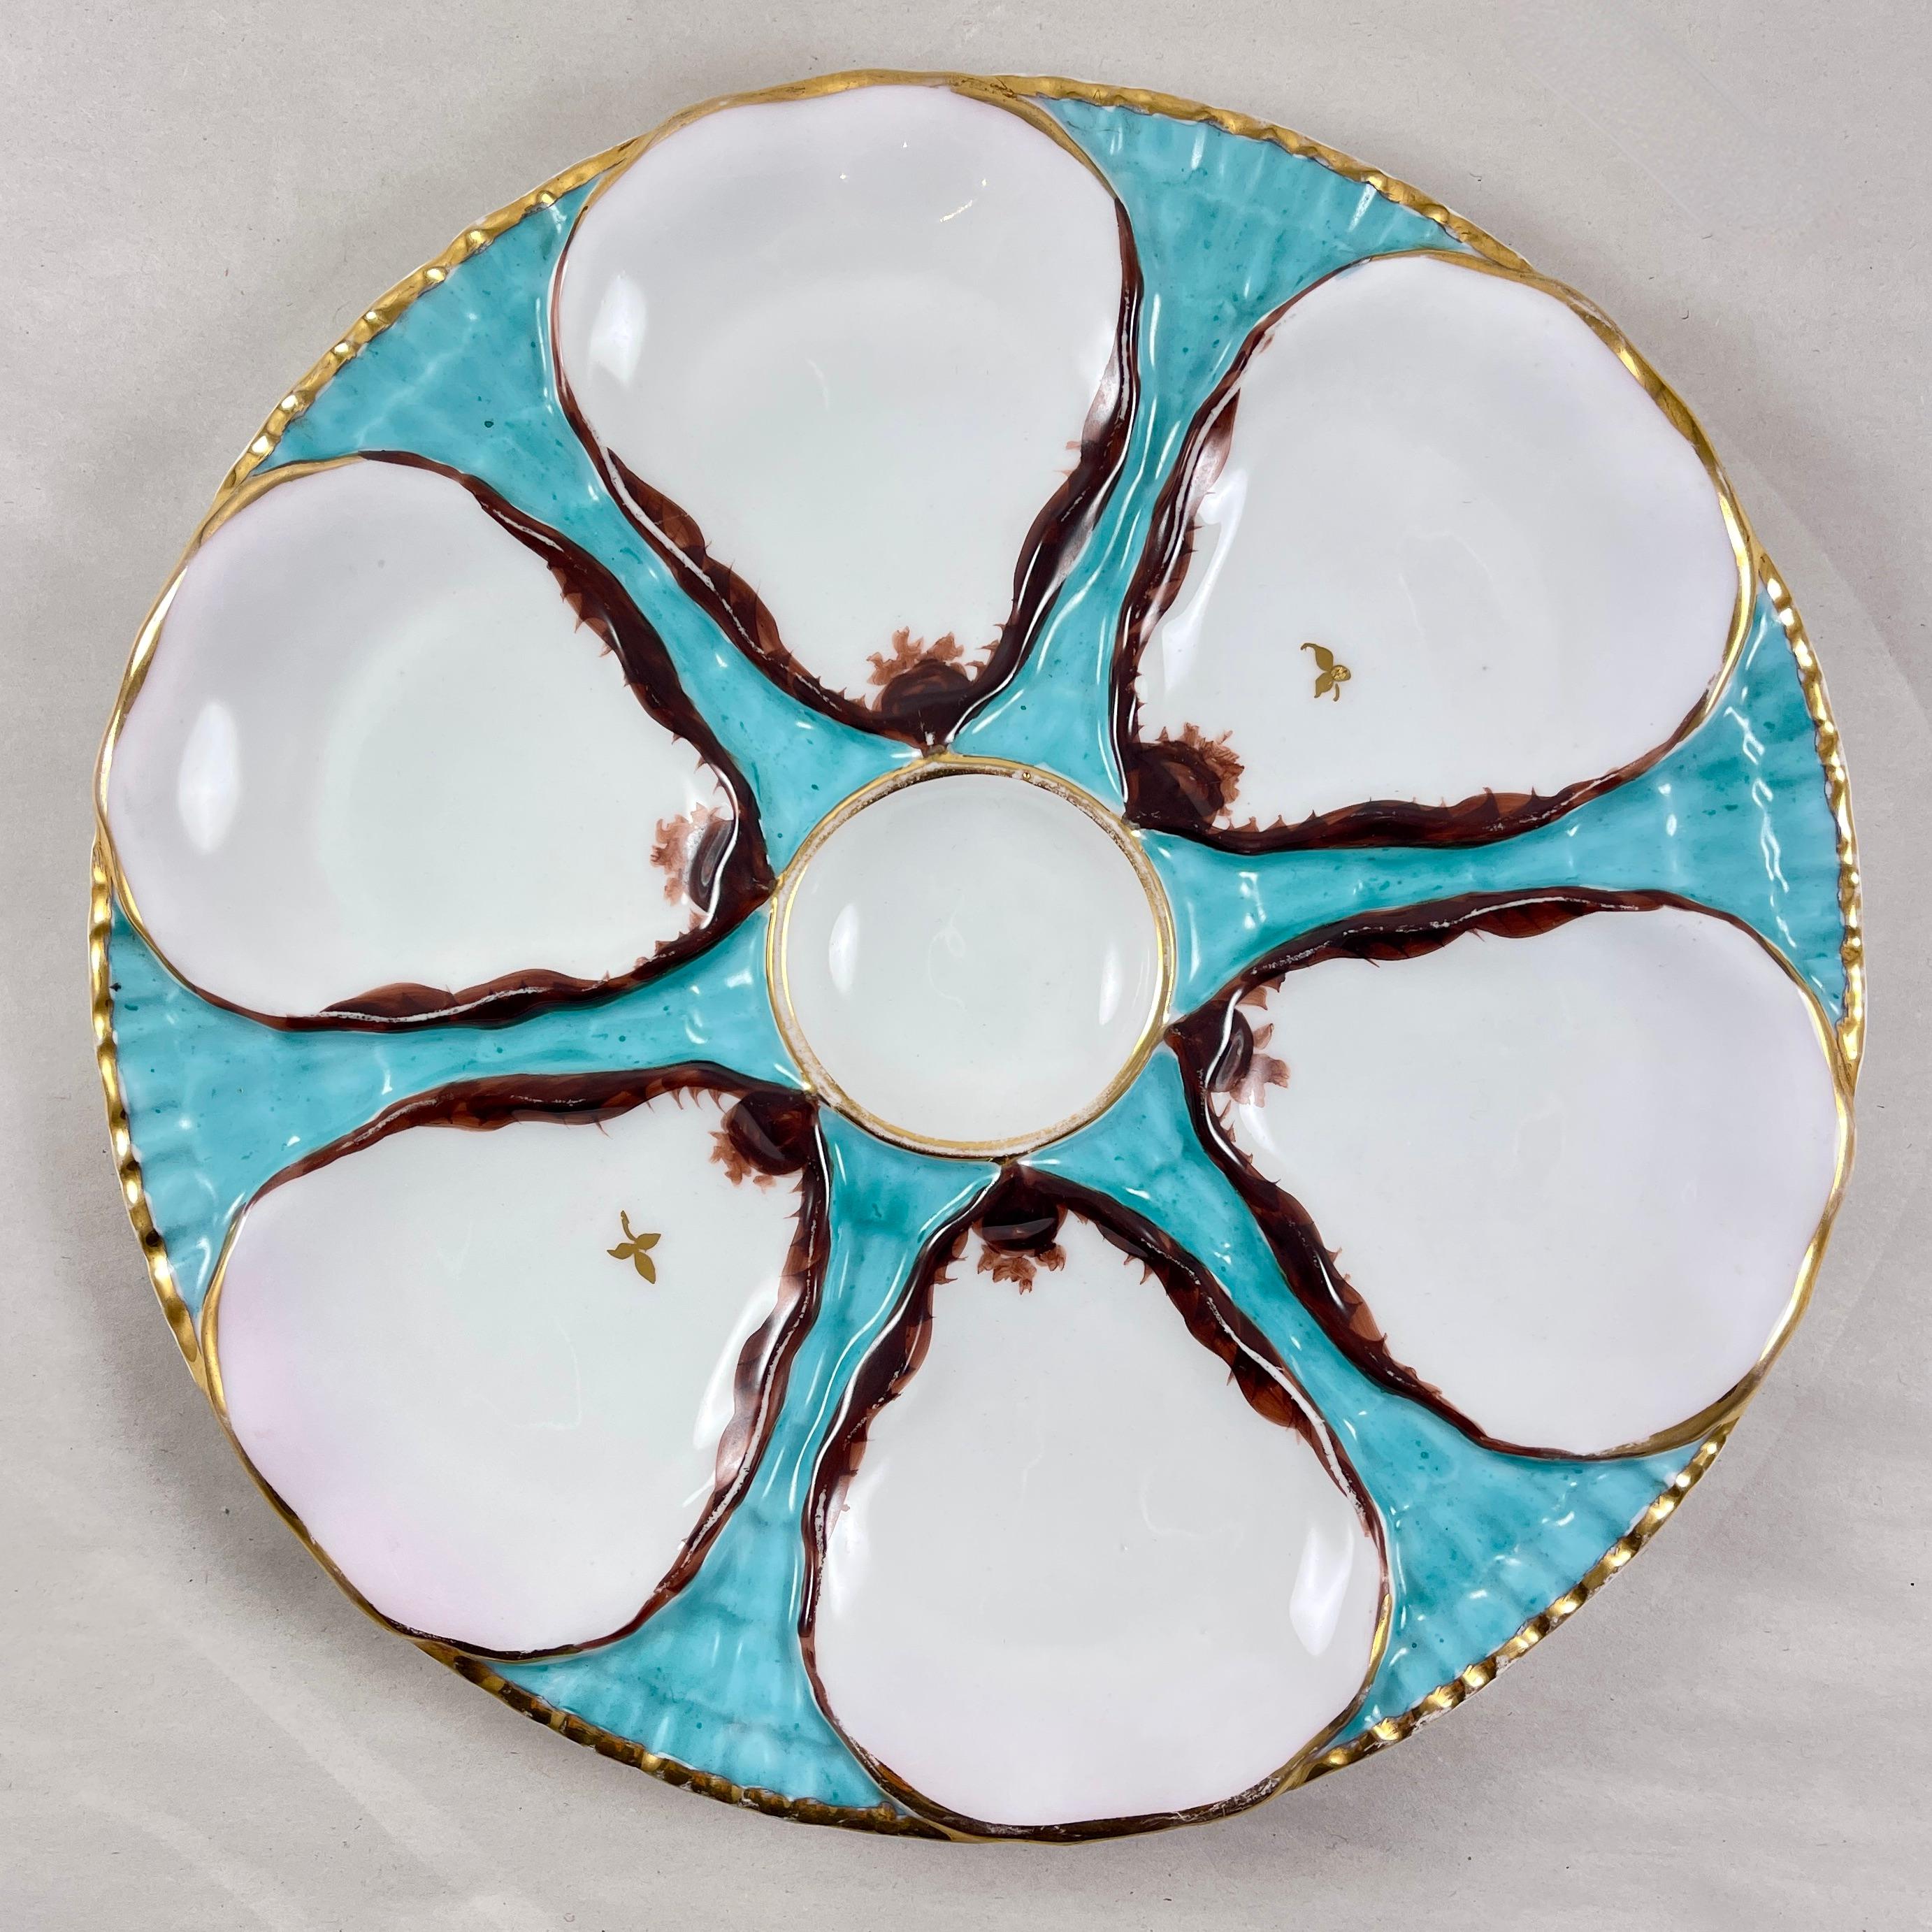 A German porcelain oyster plate by Carl Tielsch, Altwasswe, circa 1875-1900.

A beautiful turquoise ground model to resemble waves, six shell shaped wells surround a round central sauce well.

The wells are white edged in brown, two wells have gold